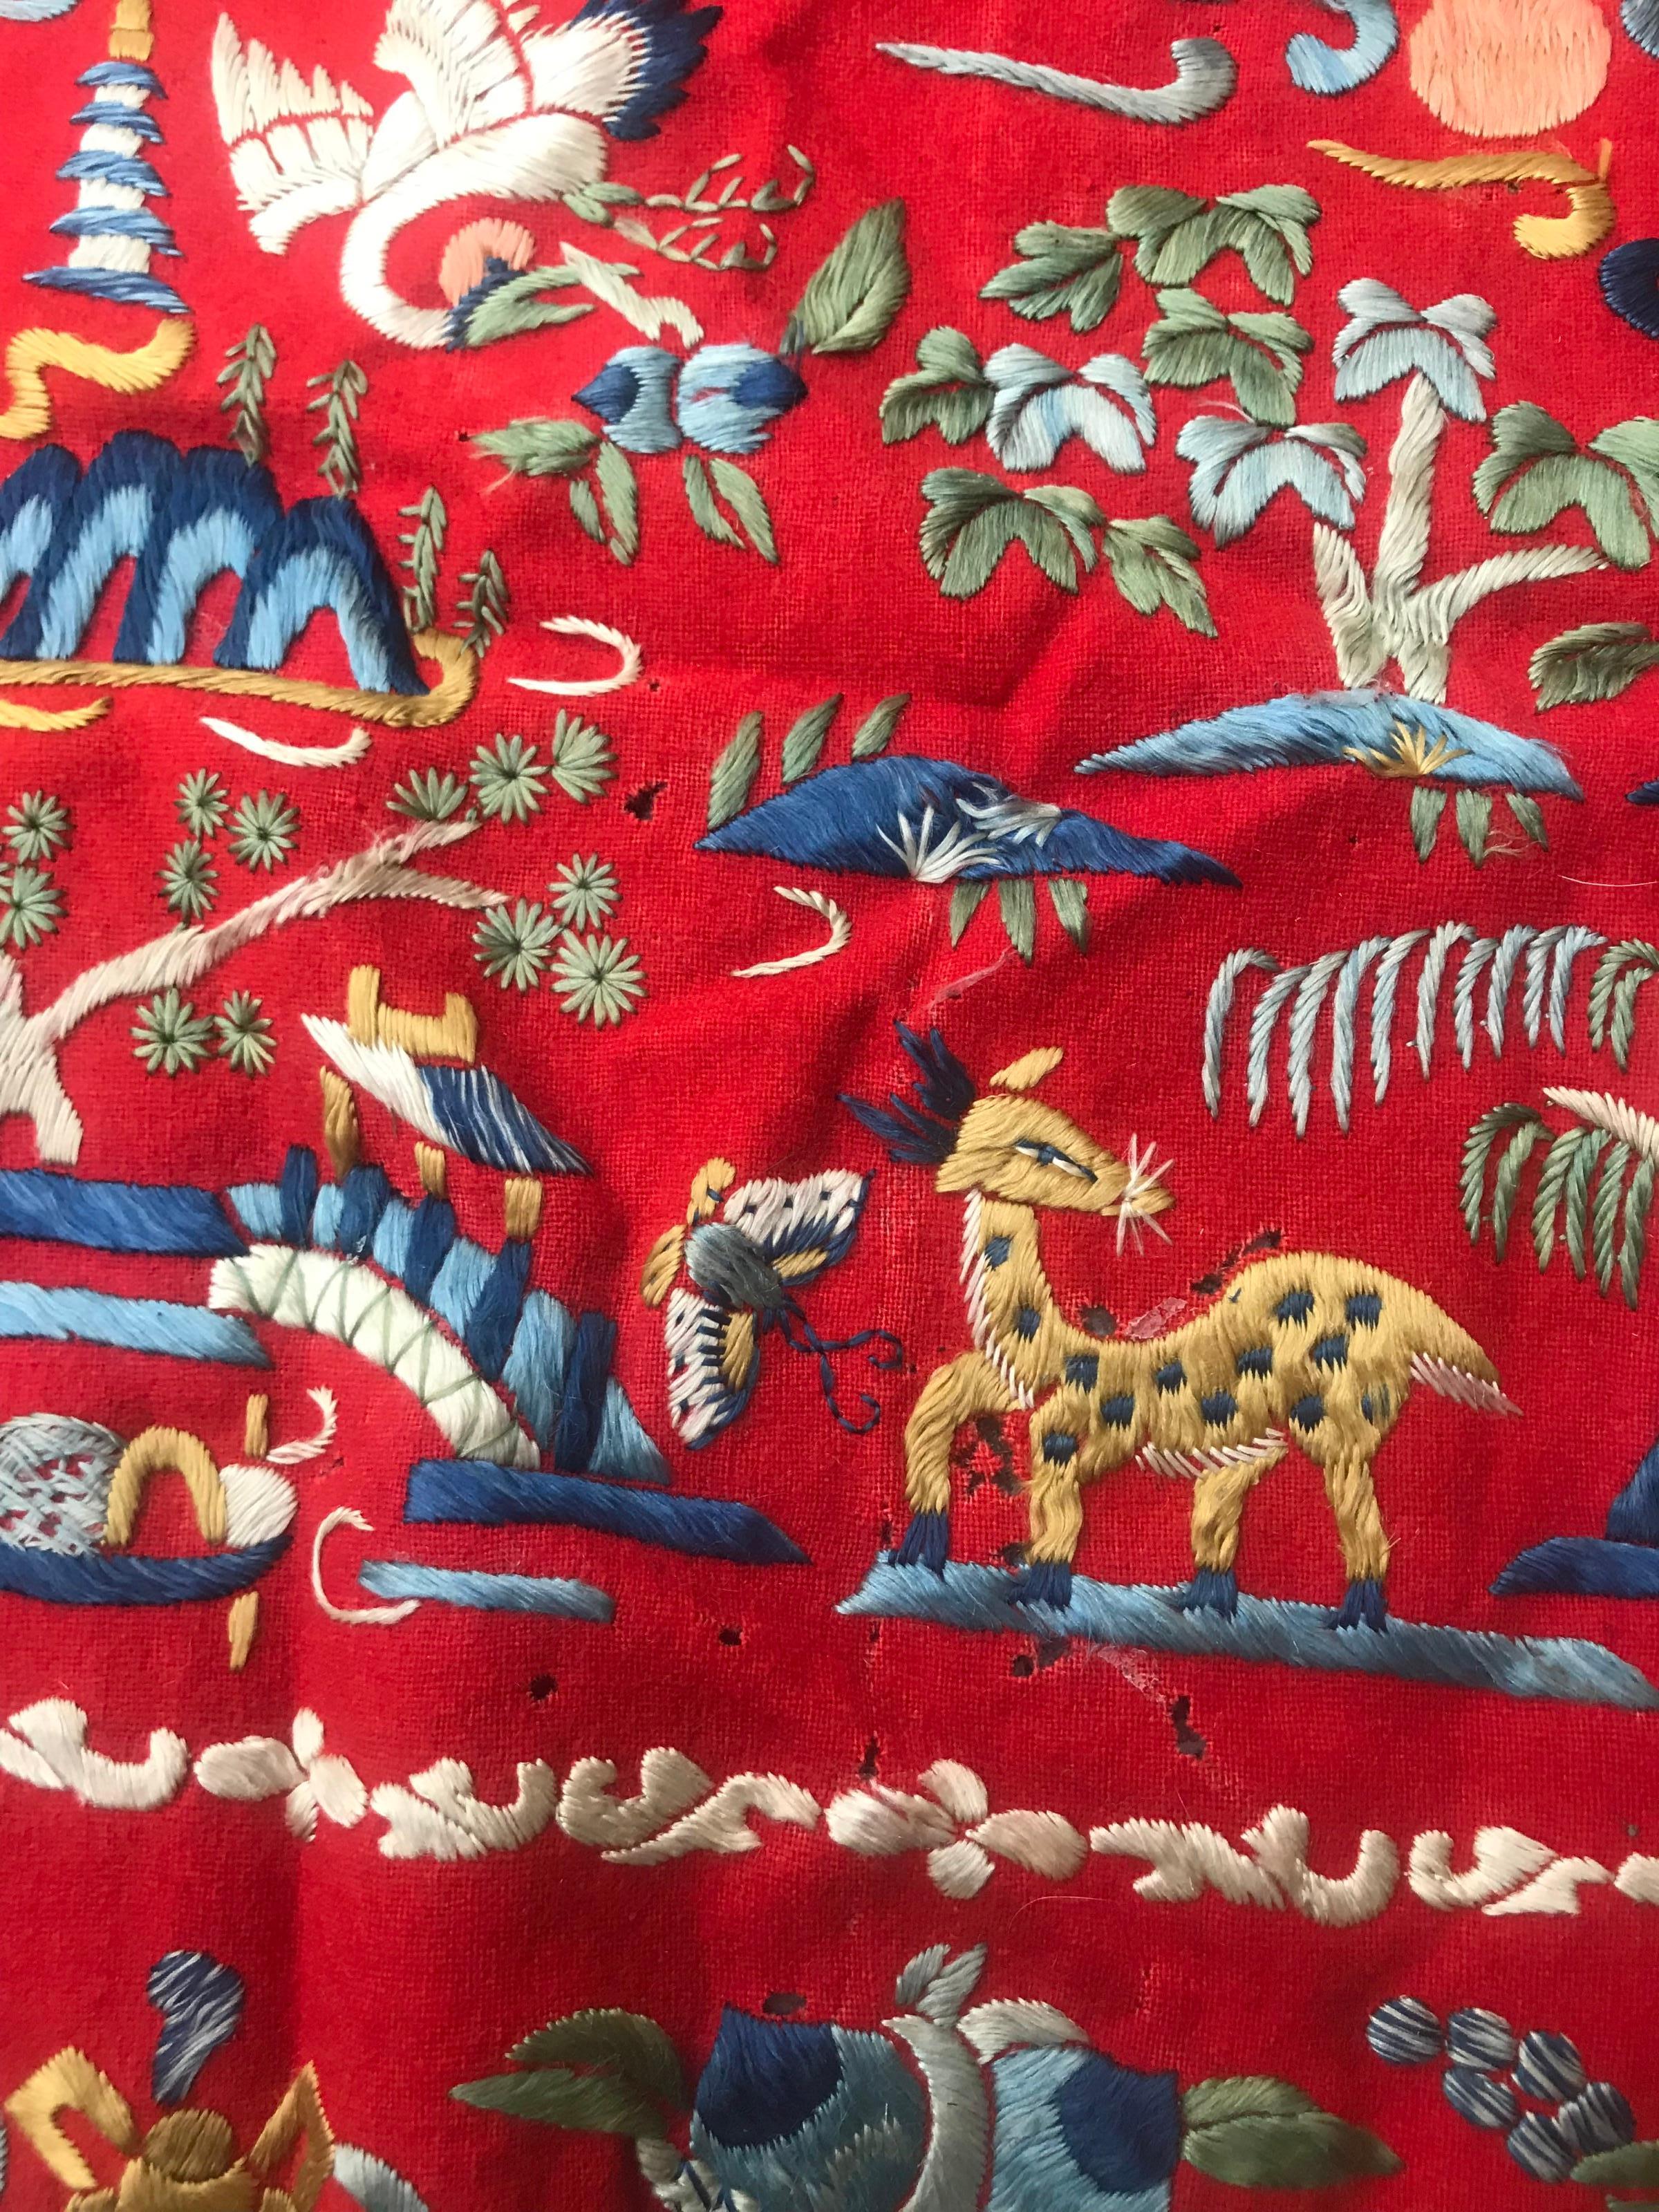 Wool Little Antique Chinese Embroidery For Sale